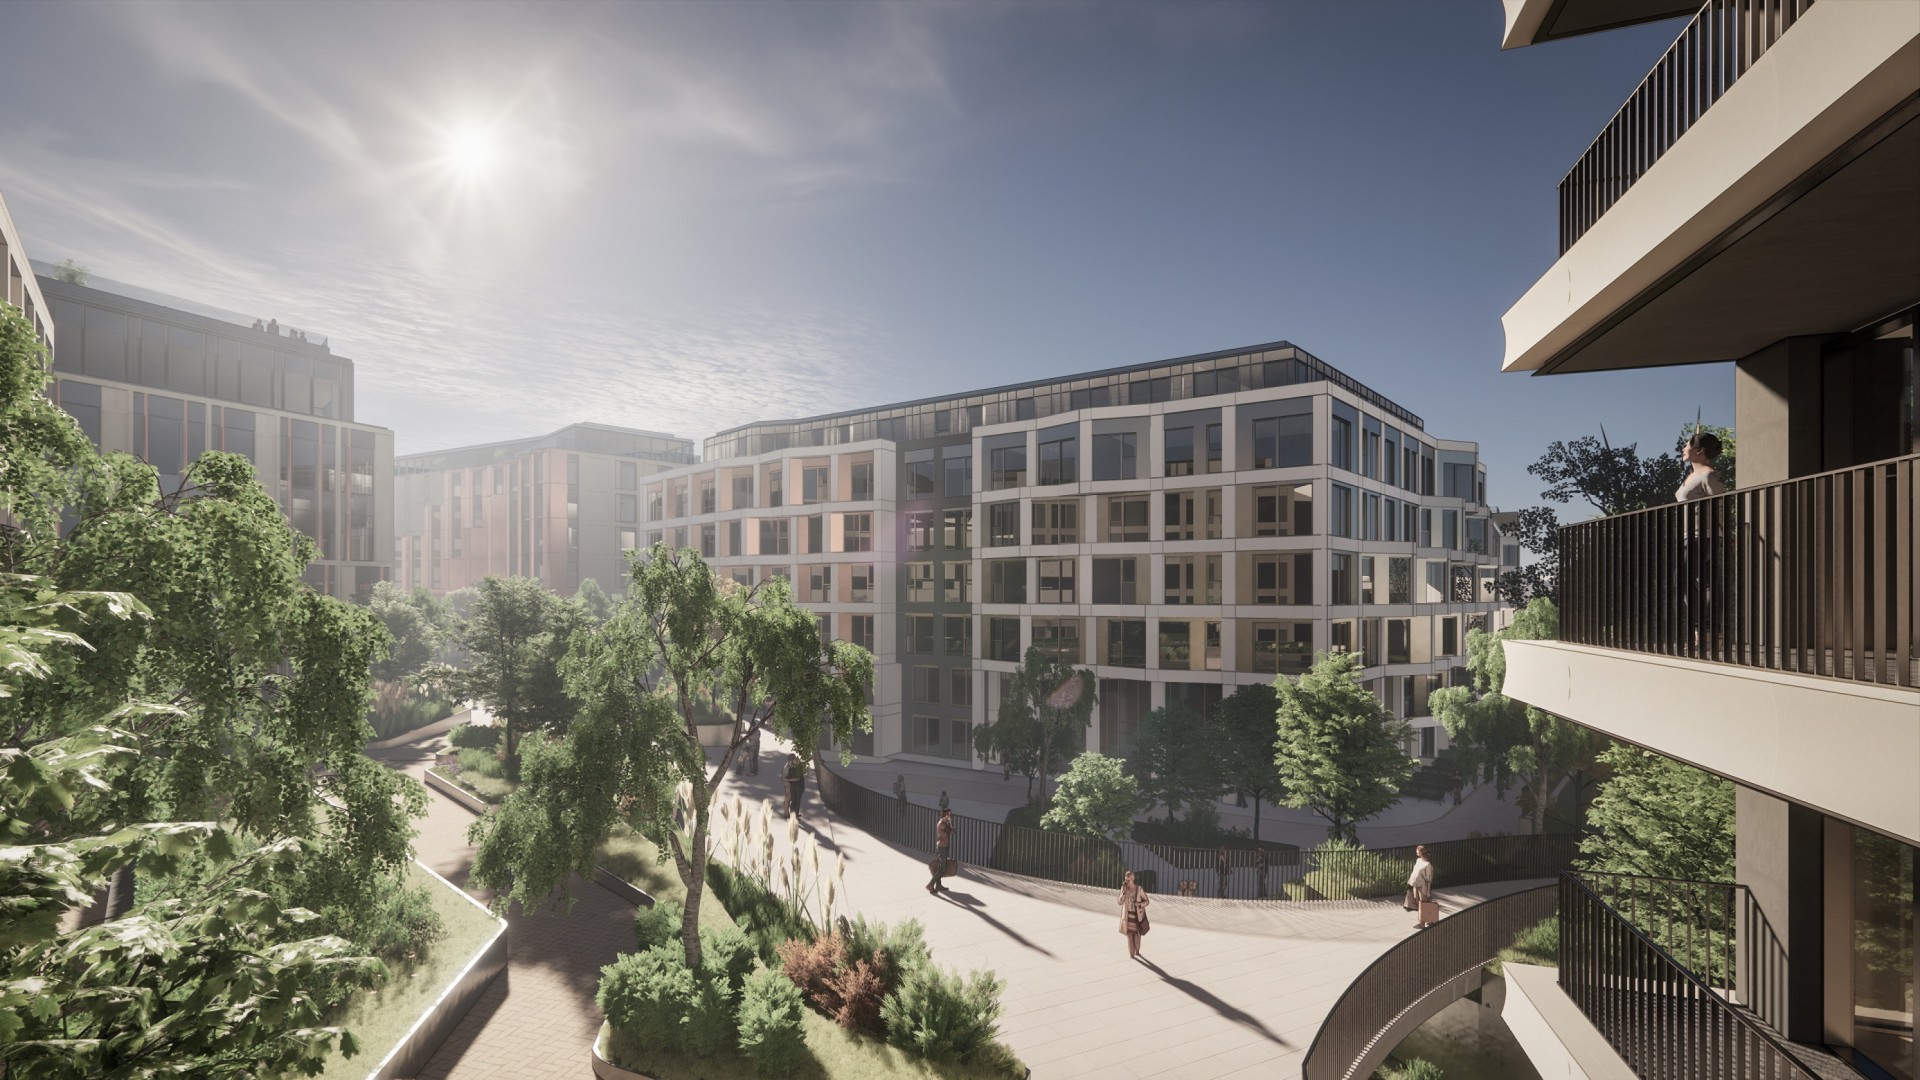 Video: Detailed designs unveiled for New Town Quarter development